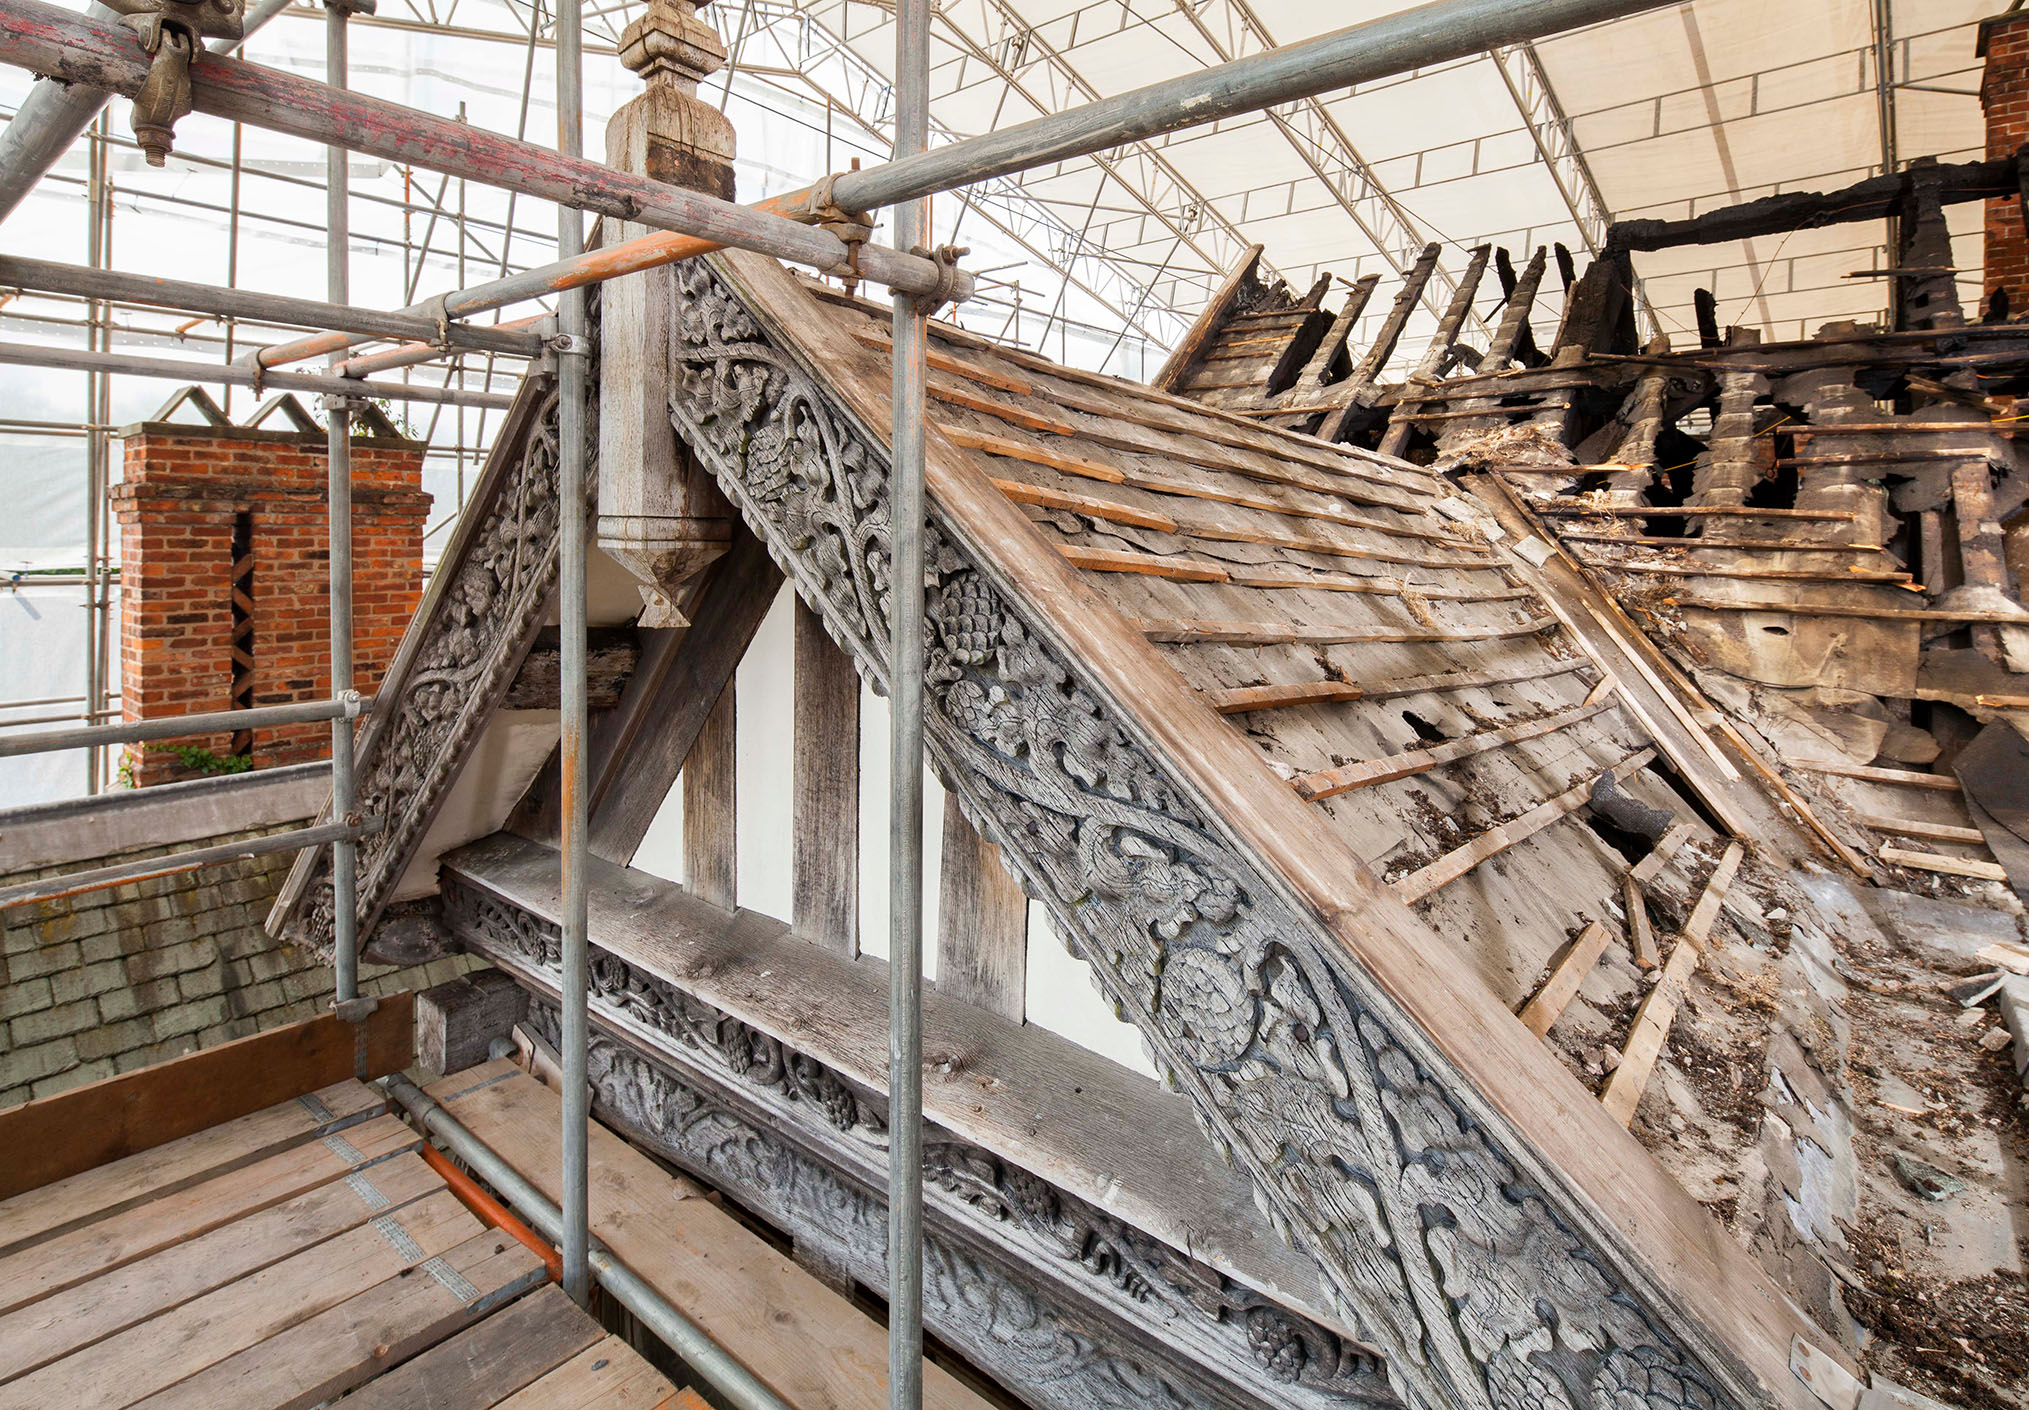 A view of decorated roof timbers at Grade II* listed Wythenshawe Hall, Manchester